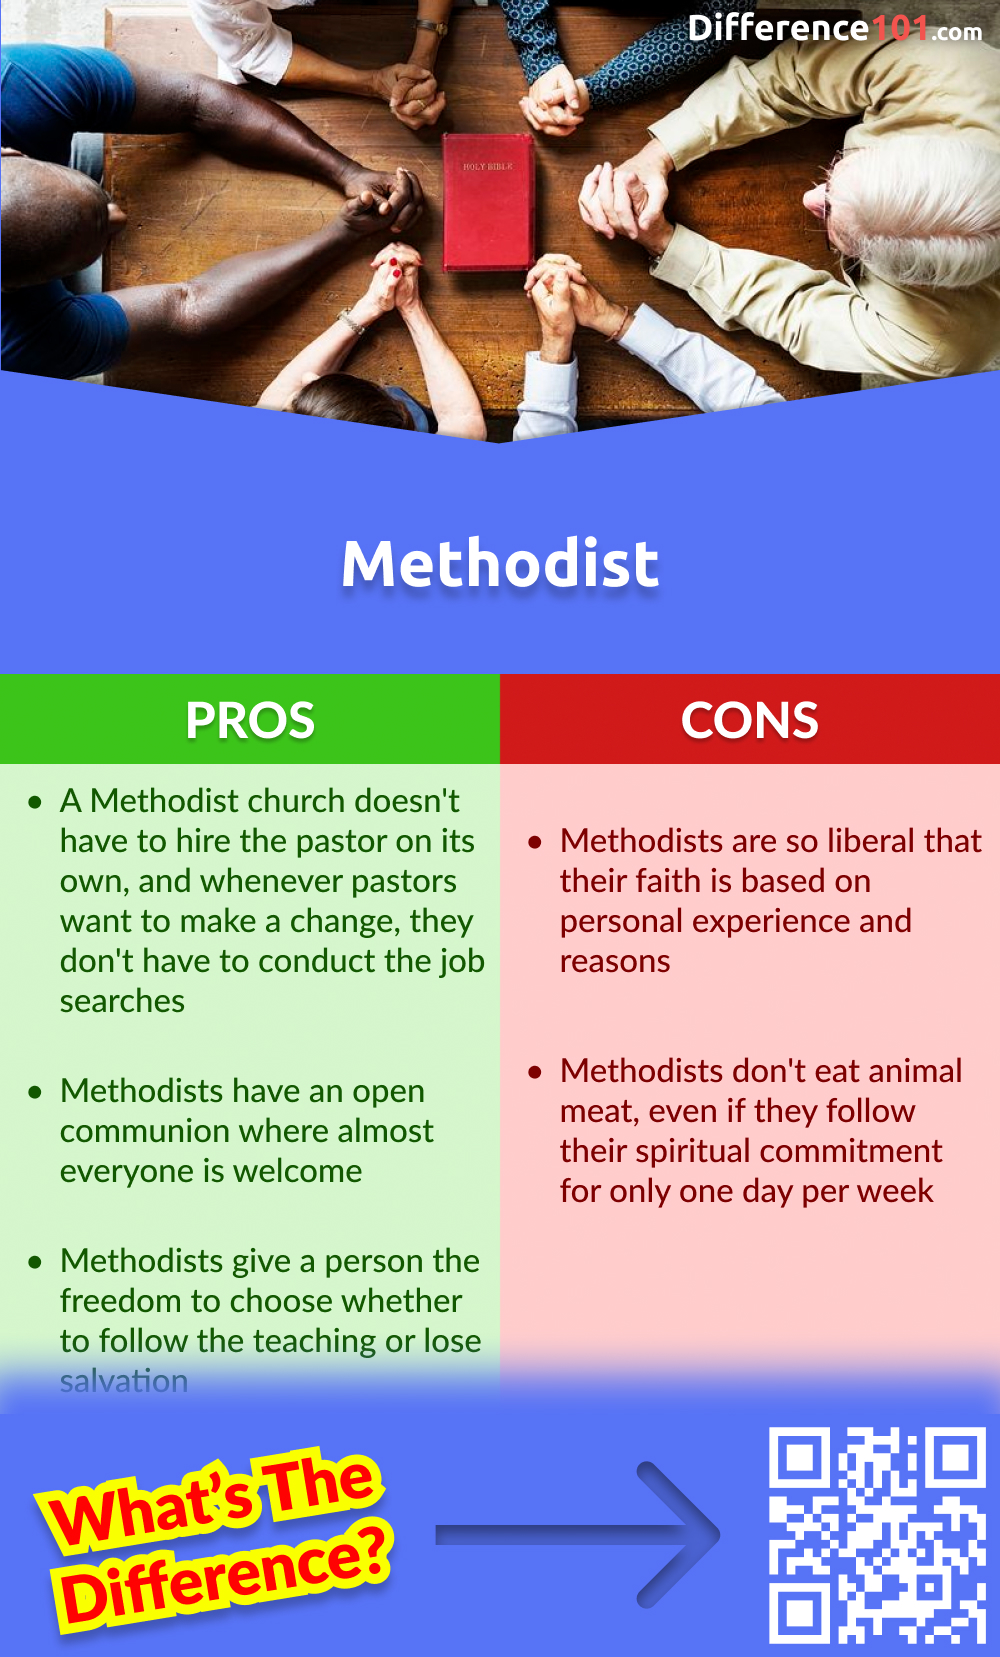 Pros and cons of Methodist